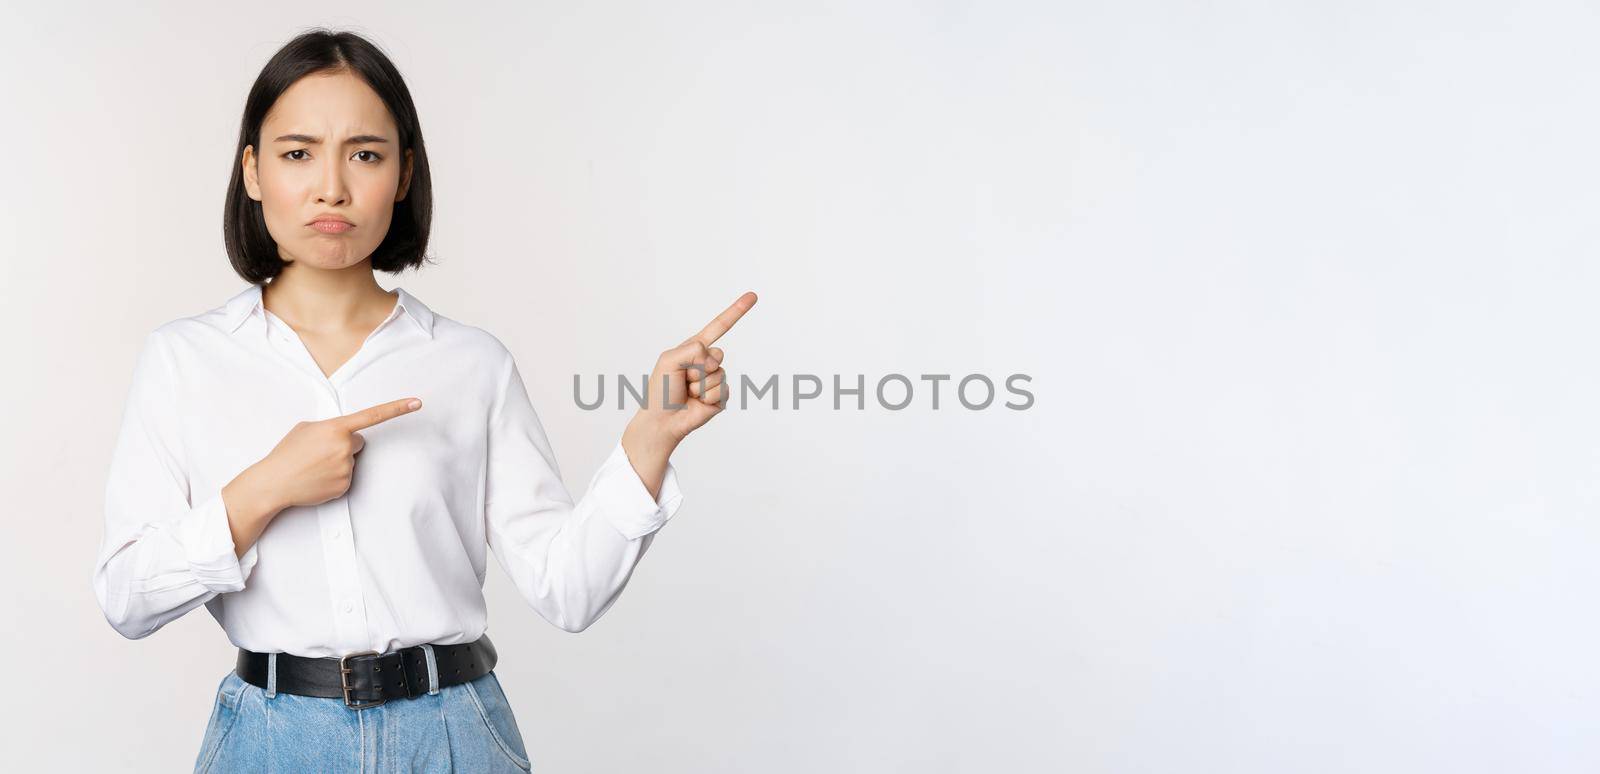 Sad and gloomy asian woman looking disappointed, complaining at banner or advertisement, pointing fingers right at promo and frowning upset, white background.